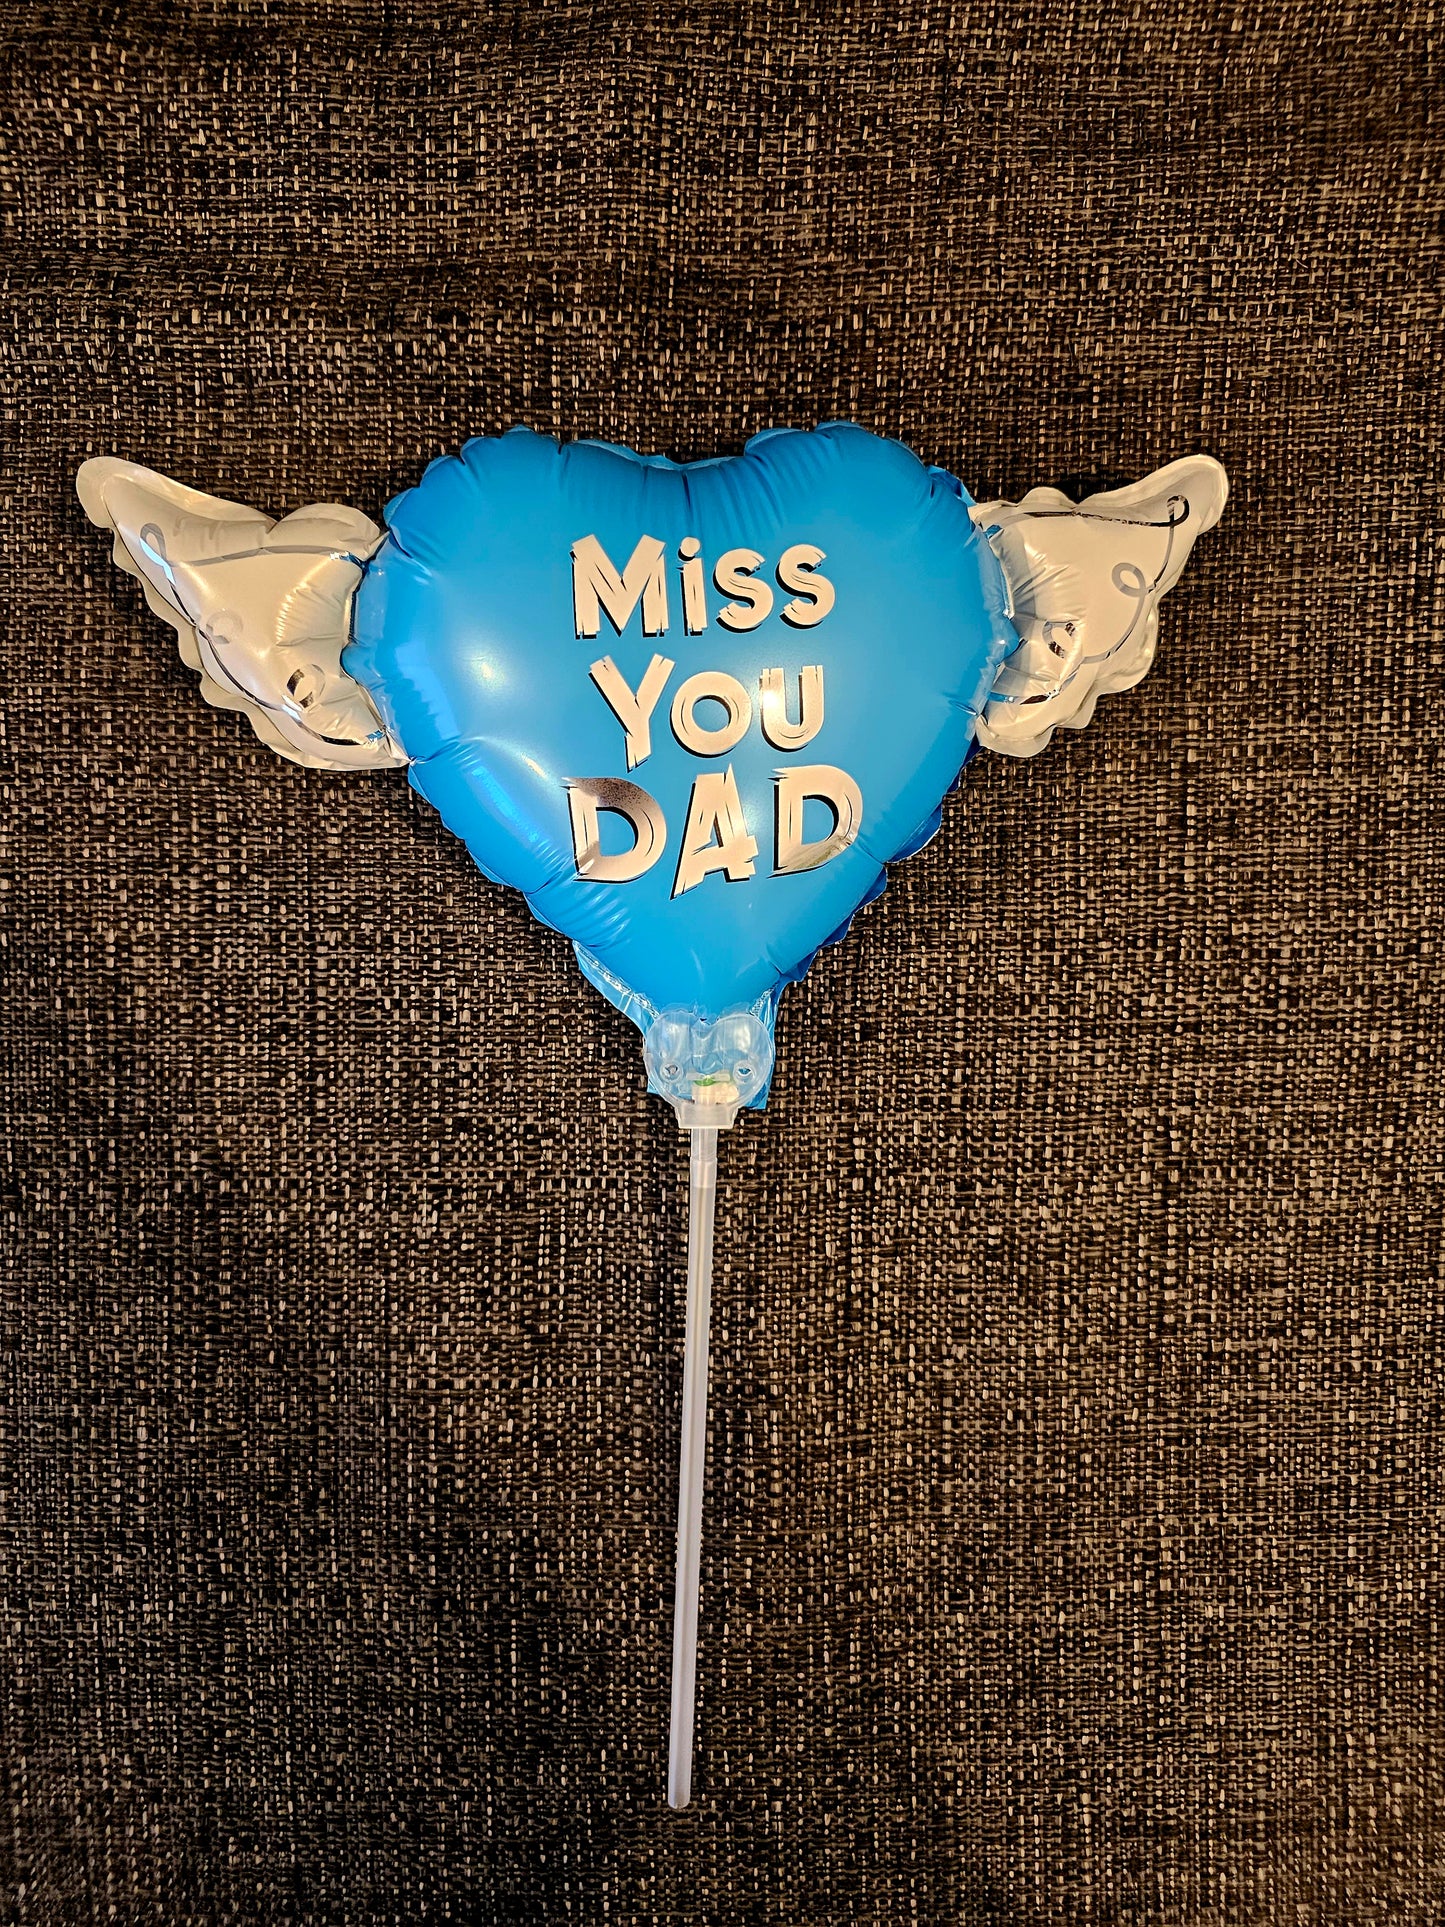 Heavenly Balloons ® on a Stick Miss You Dad (blue) balloon heart-shaped with angel wings dimensions